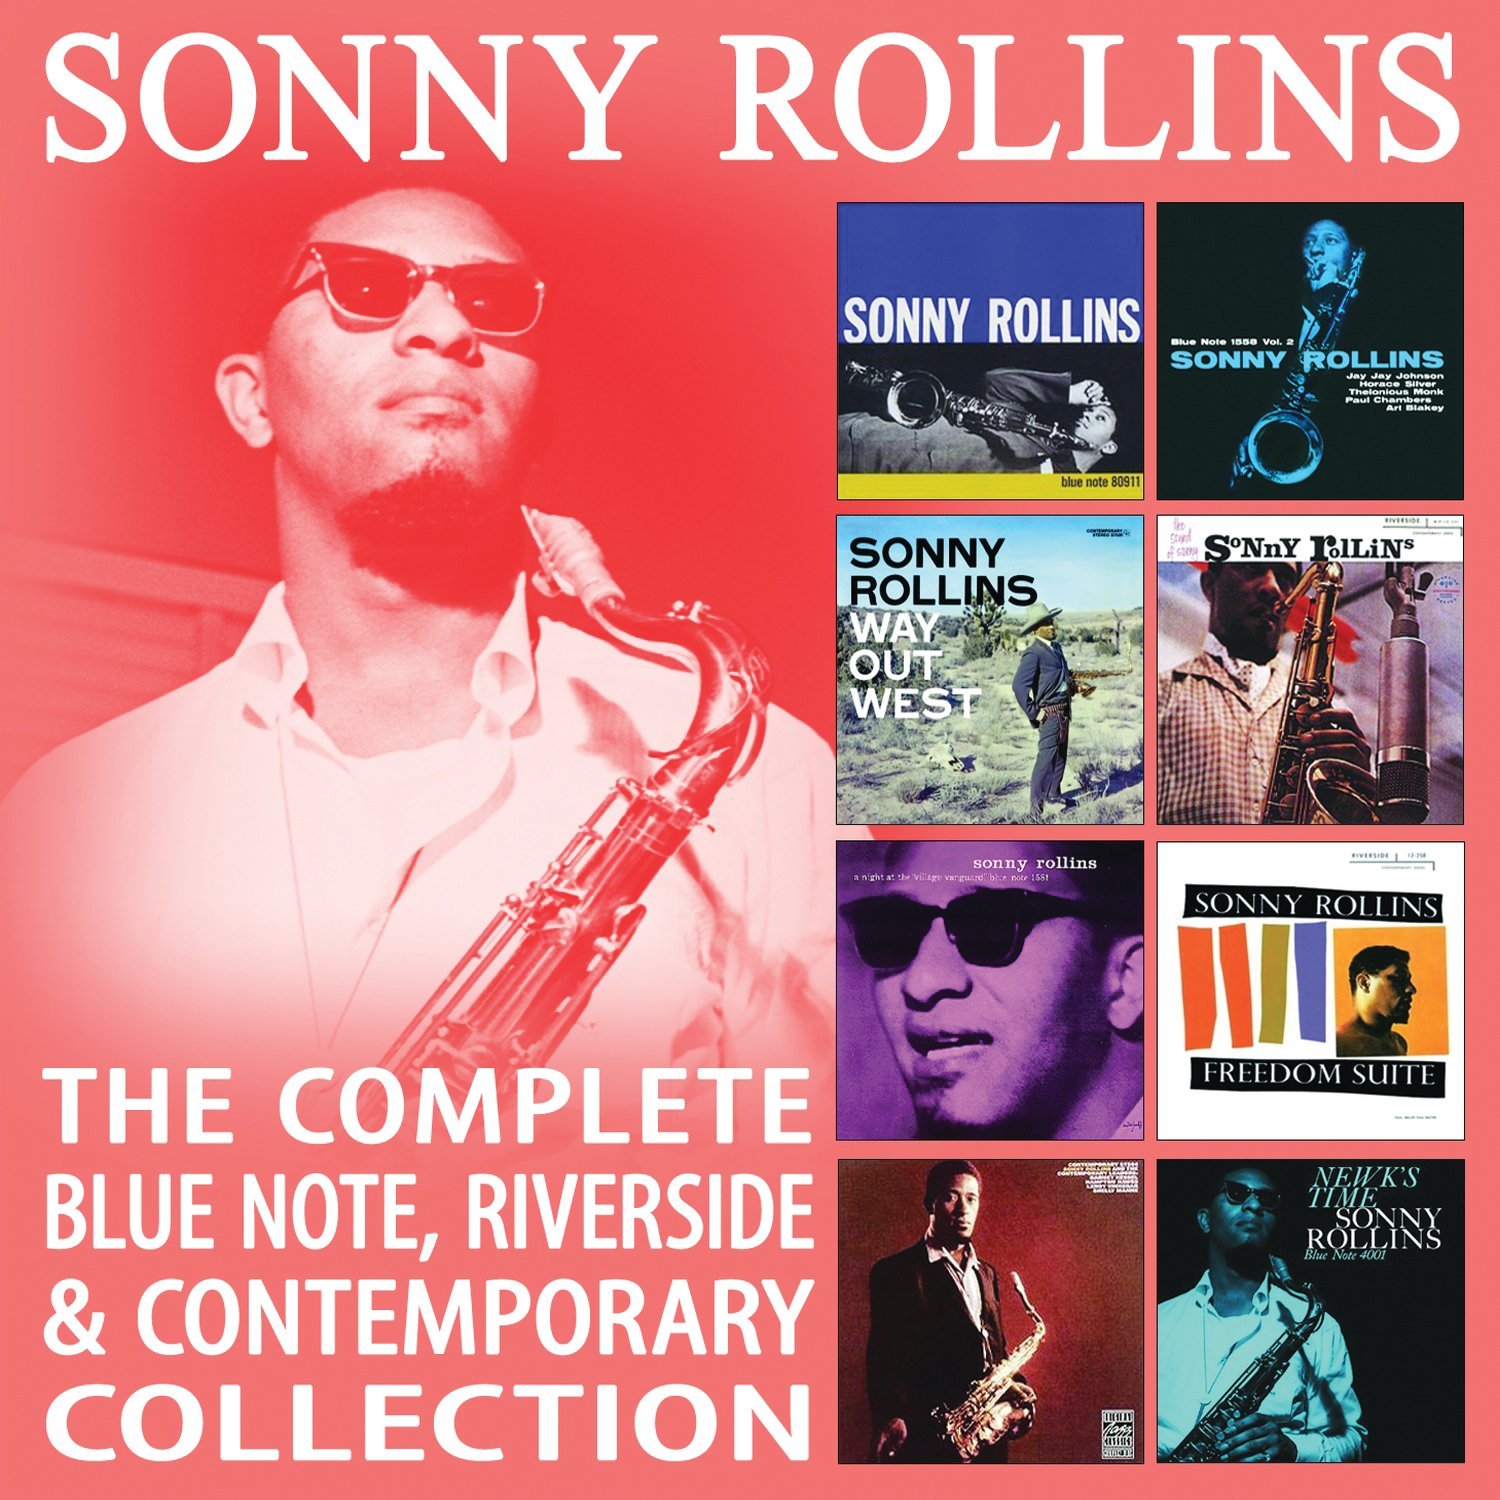 SONNY ROLLINS - The Complete Blue Note Riverside & Contemporary Collection cover 